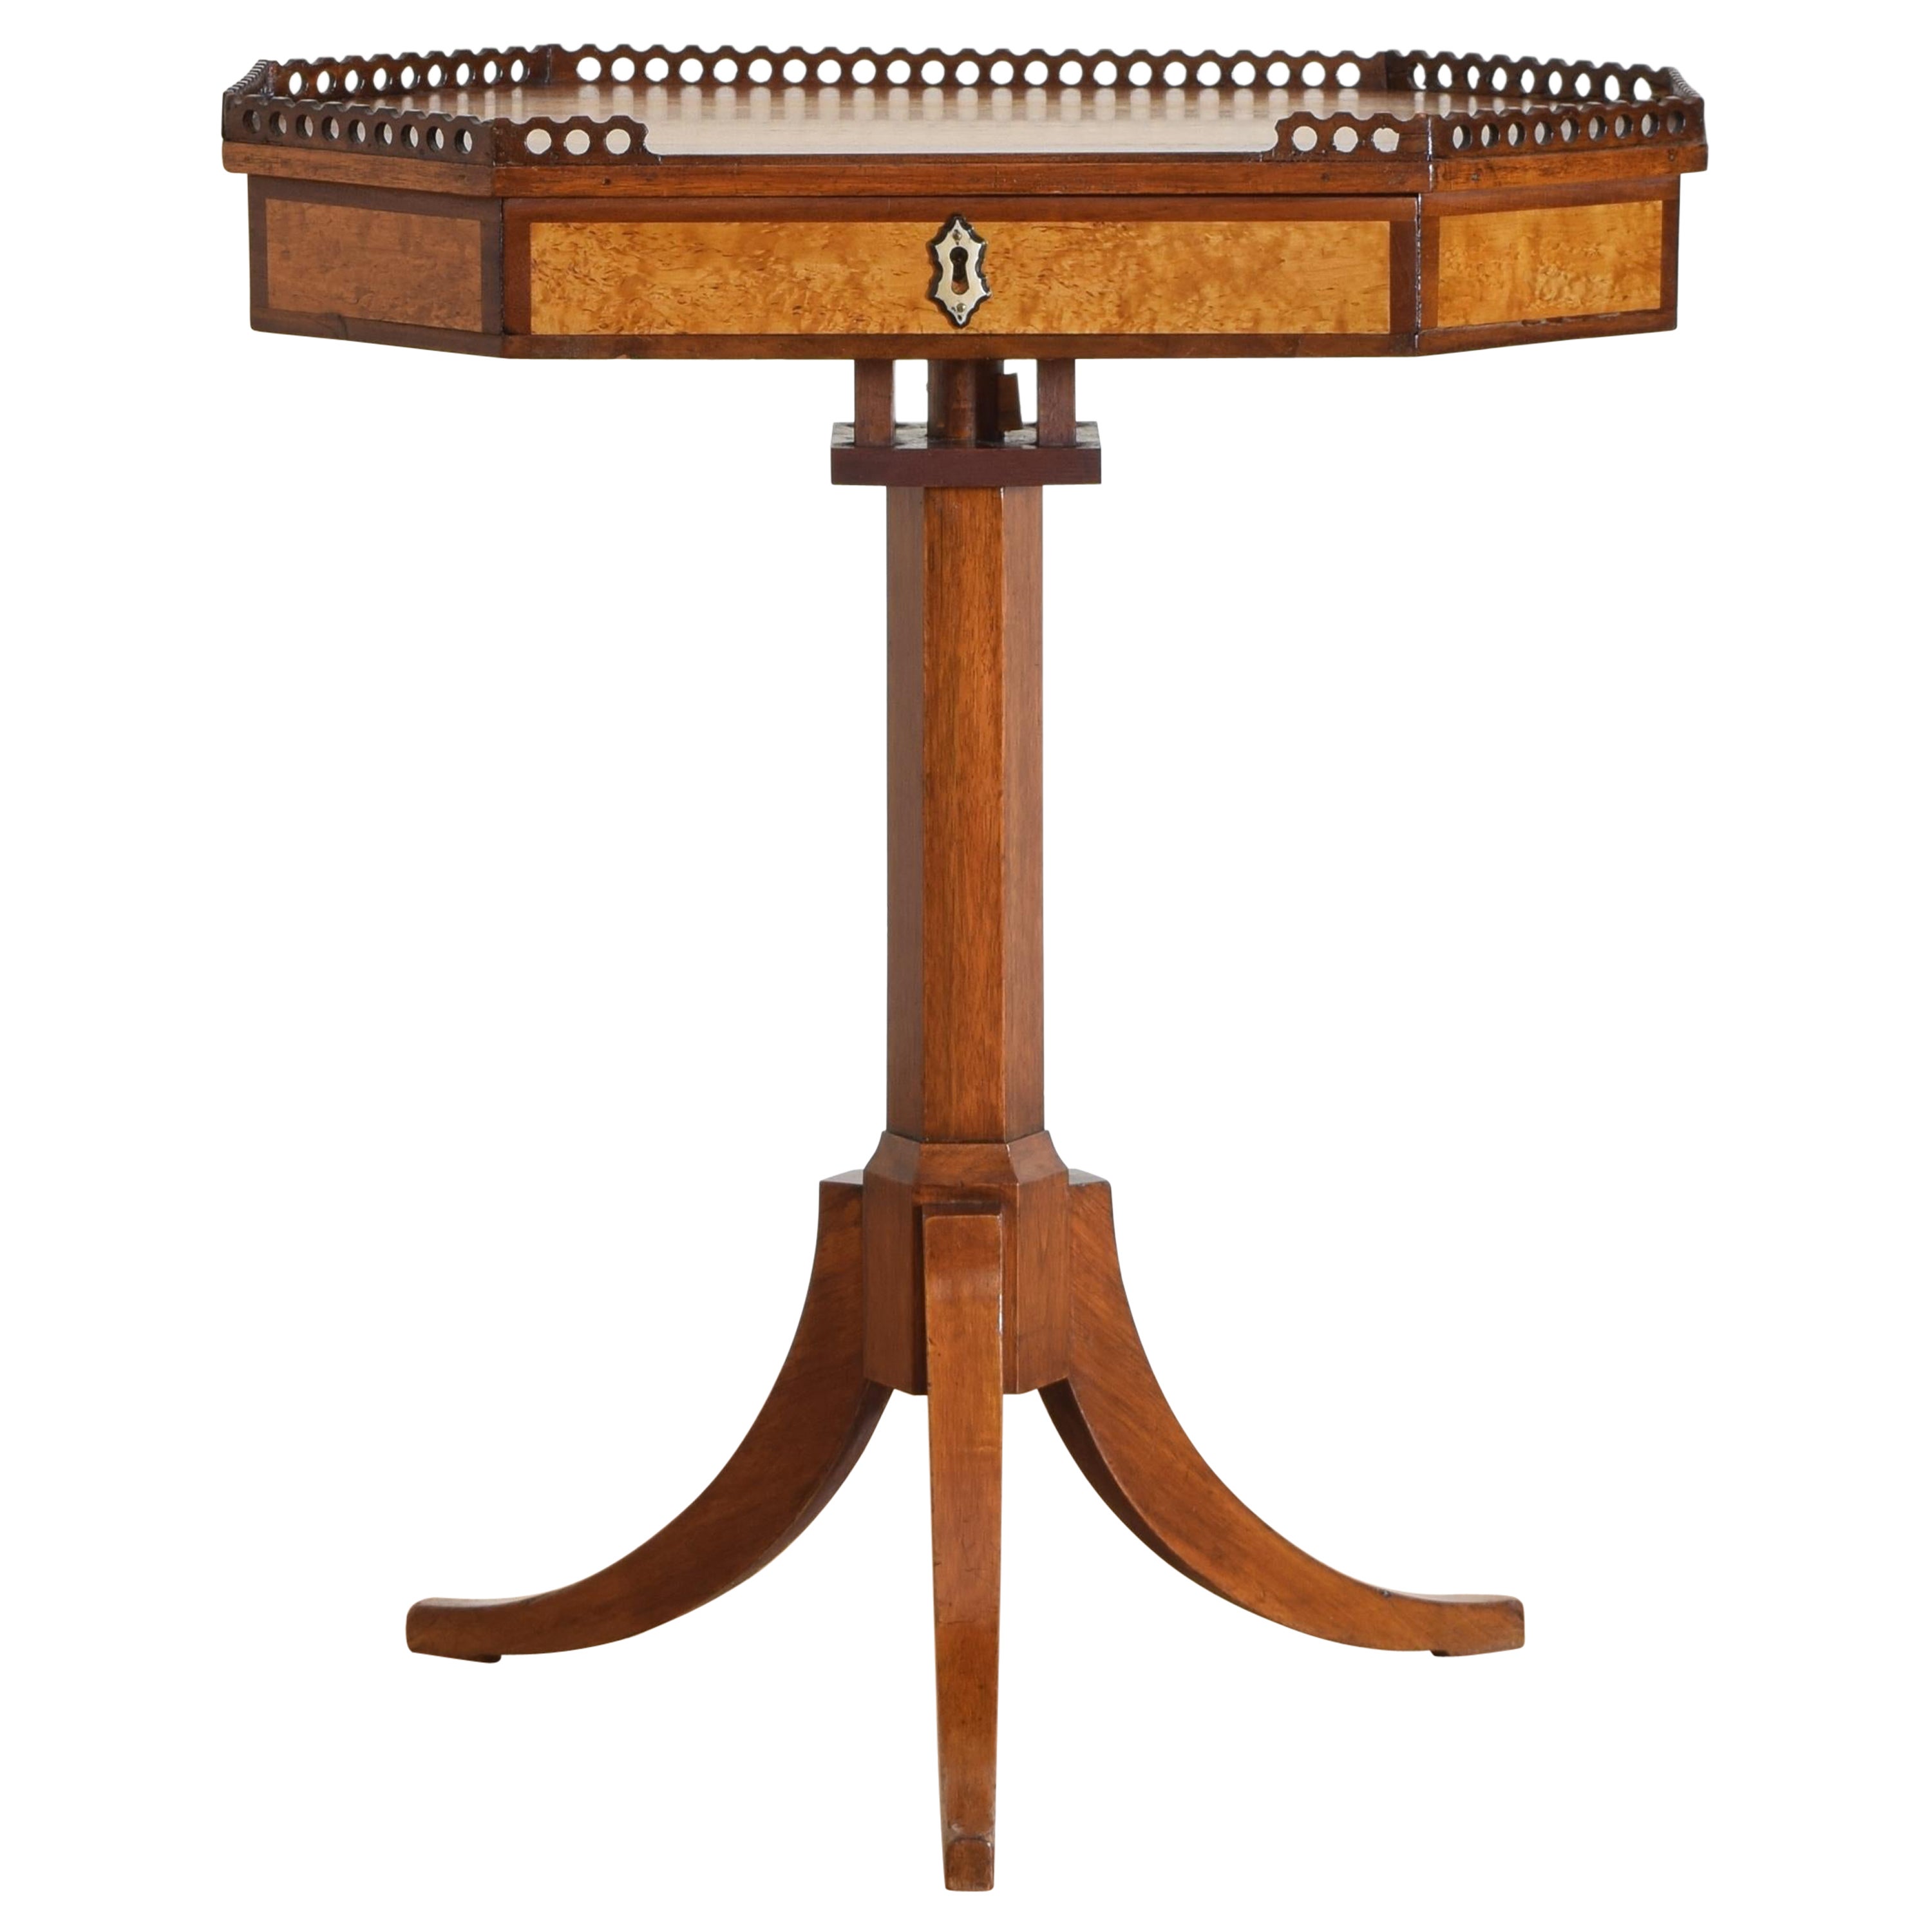 Swedish Galleried Swivel Work Table in Maple and Walnut, ca. 1887